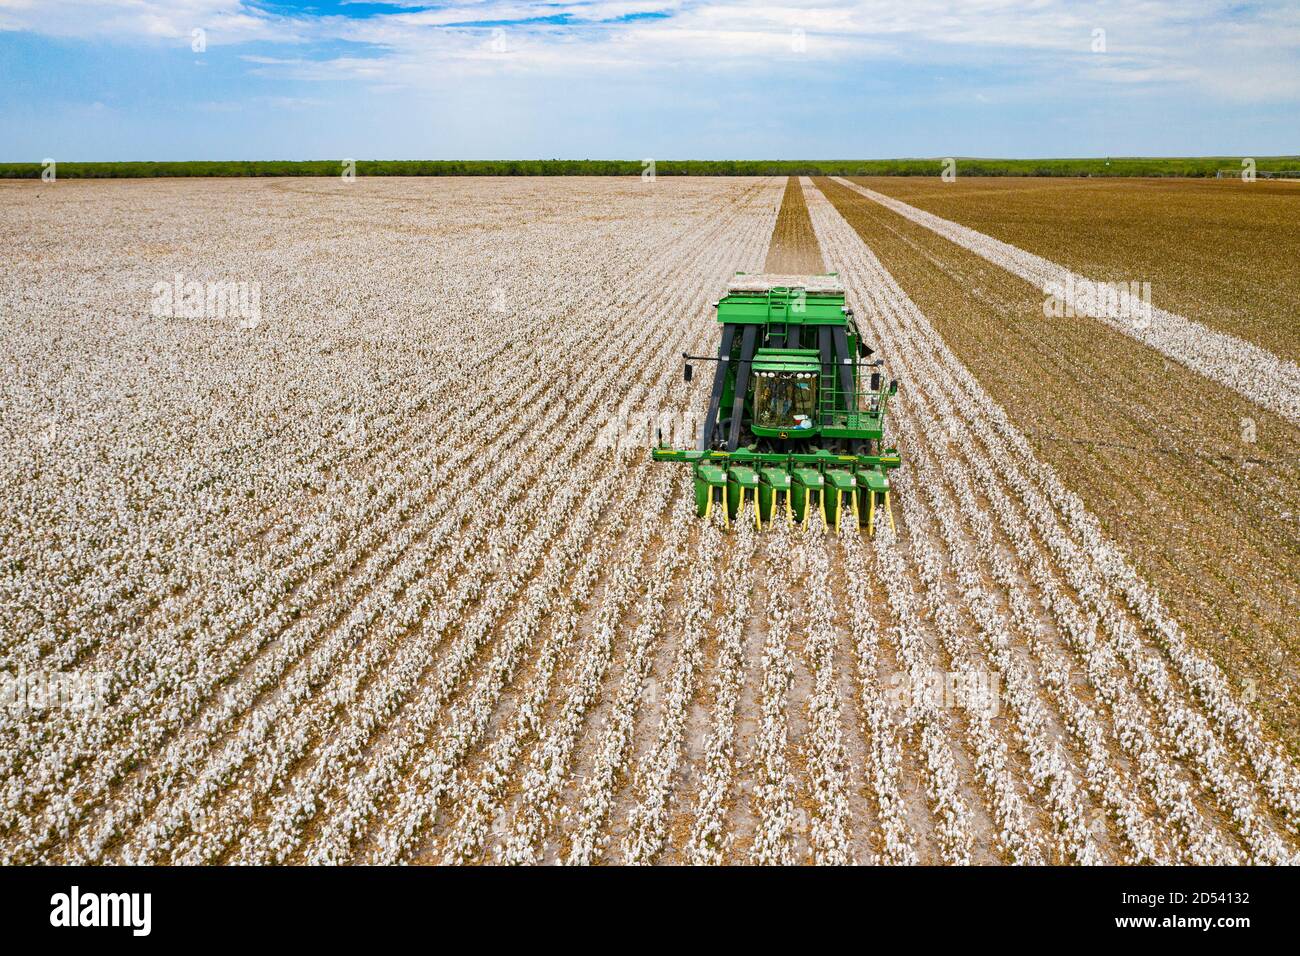 Operations Manager Brandon Schirmer operates a speciality cotton picking harvester at his family farm during the cotton harvest August 23, 2020 in Batesville, Texas. Stock Photo